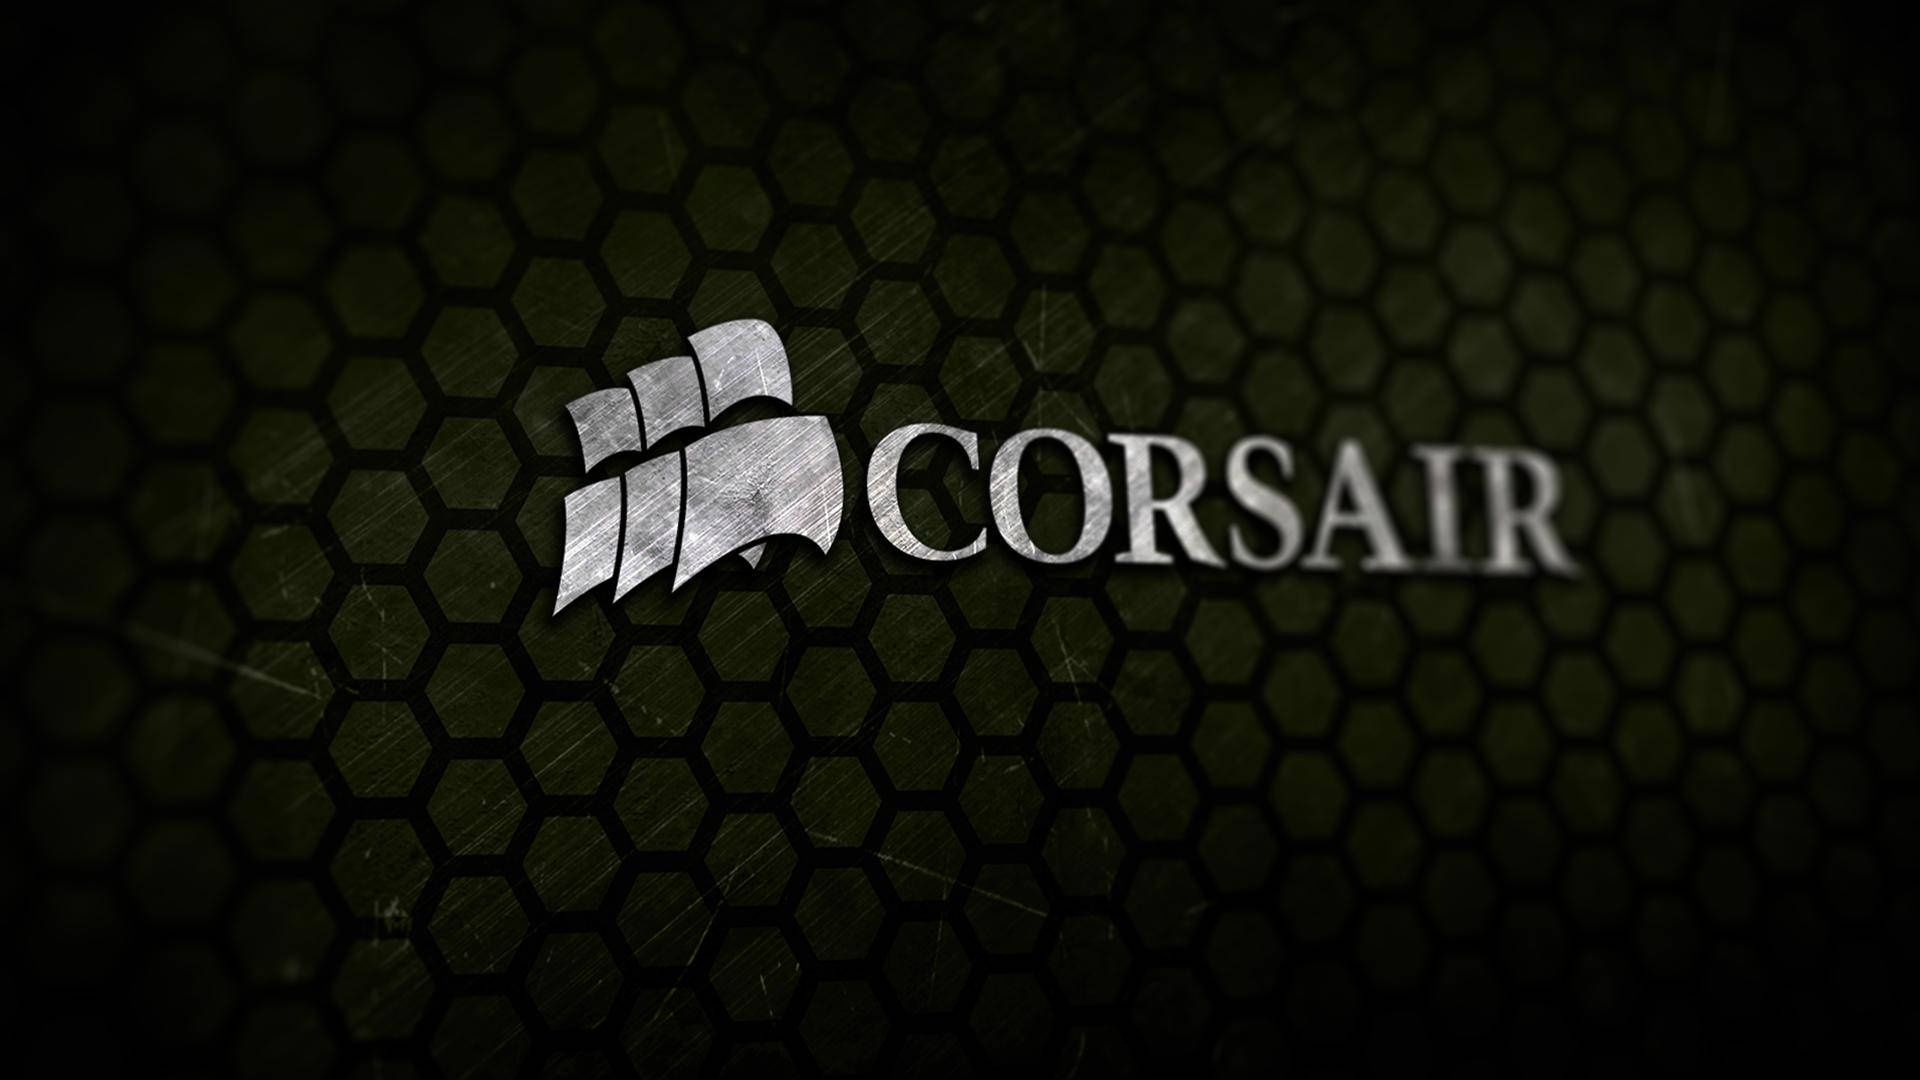 "The honeycomb pattern of Corsair's metallic body makes for true engineering brilliance." Wallpaper